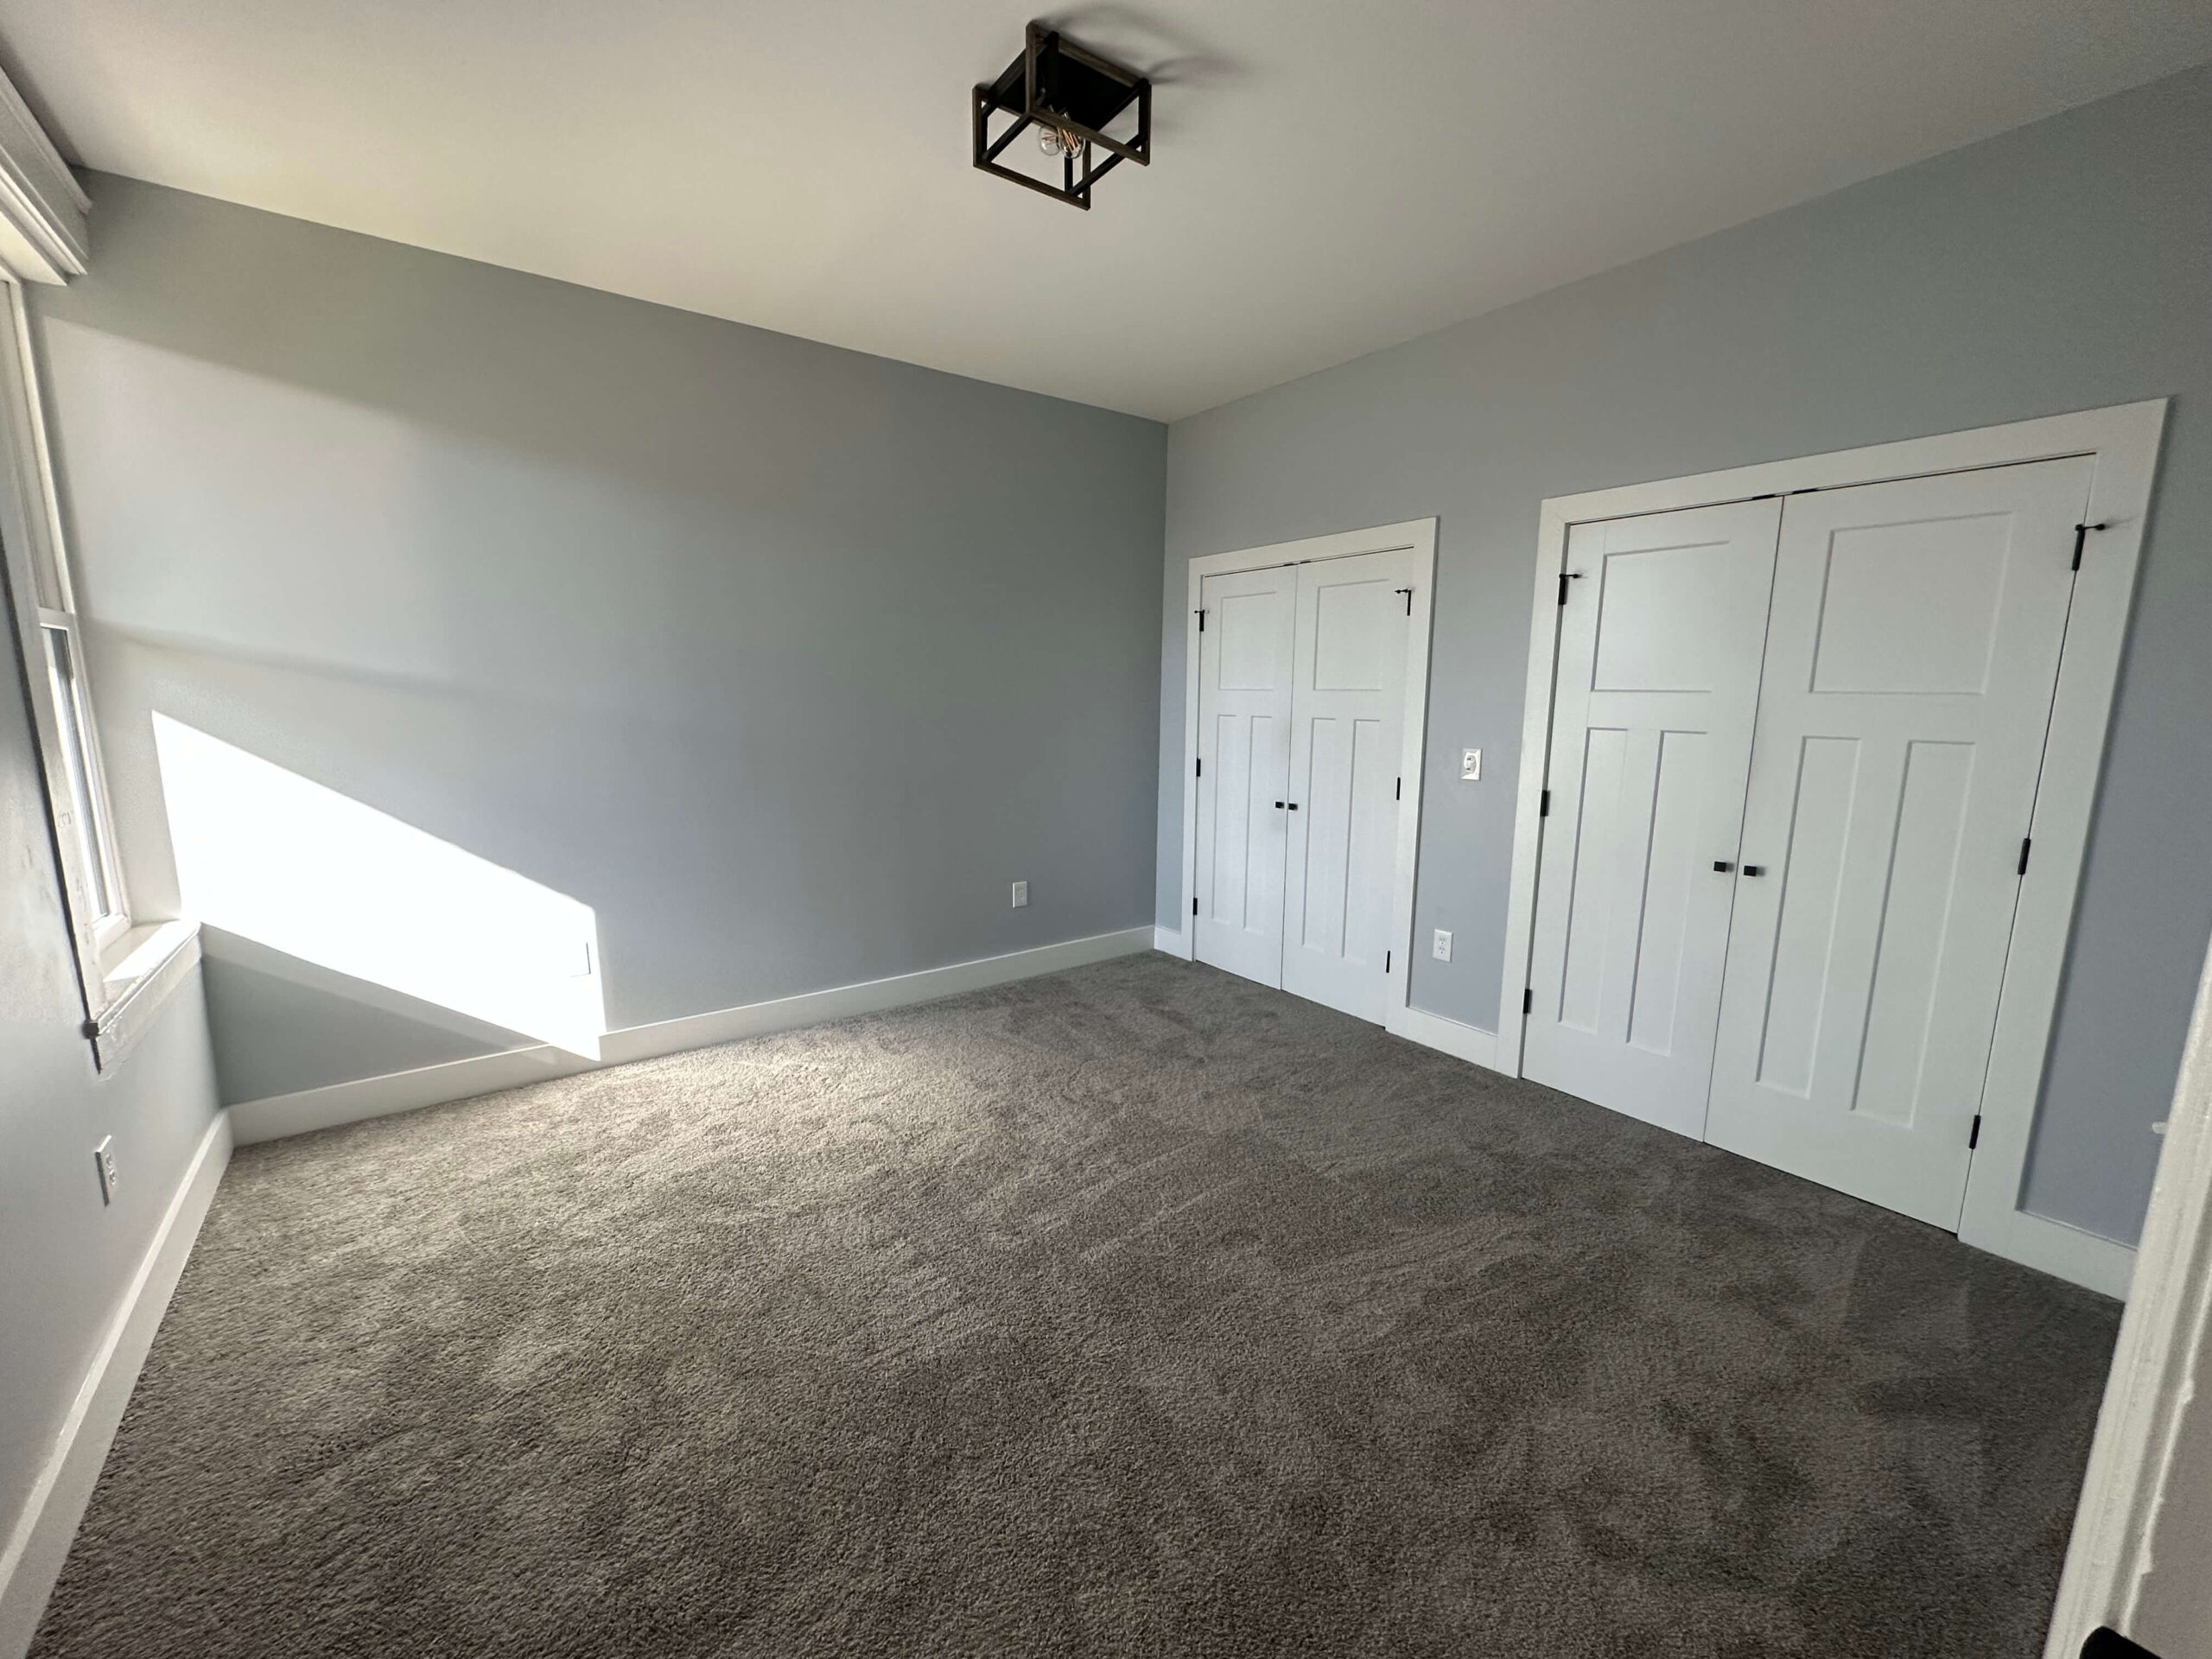 A view of a freshly painted gray room done by KSW.